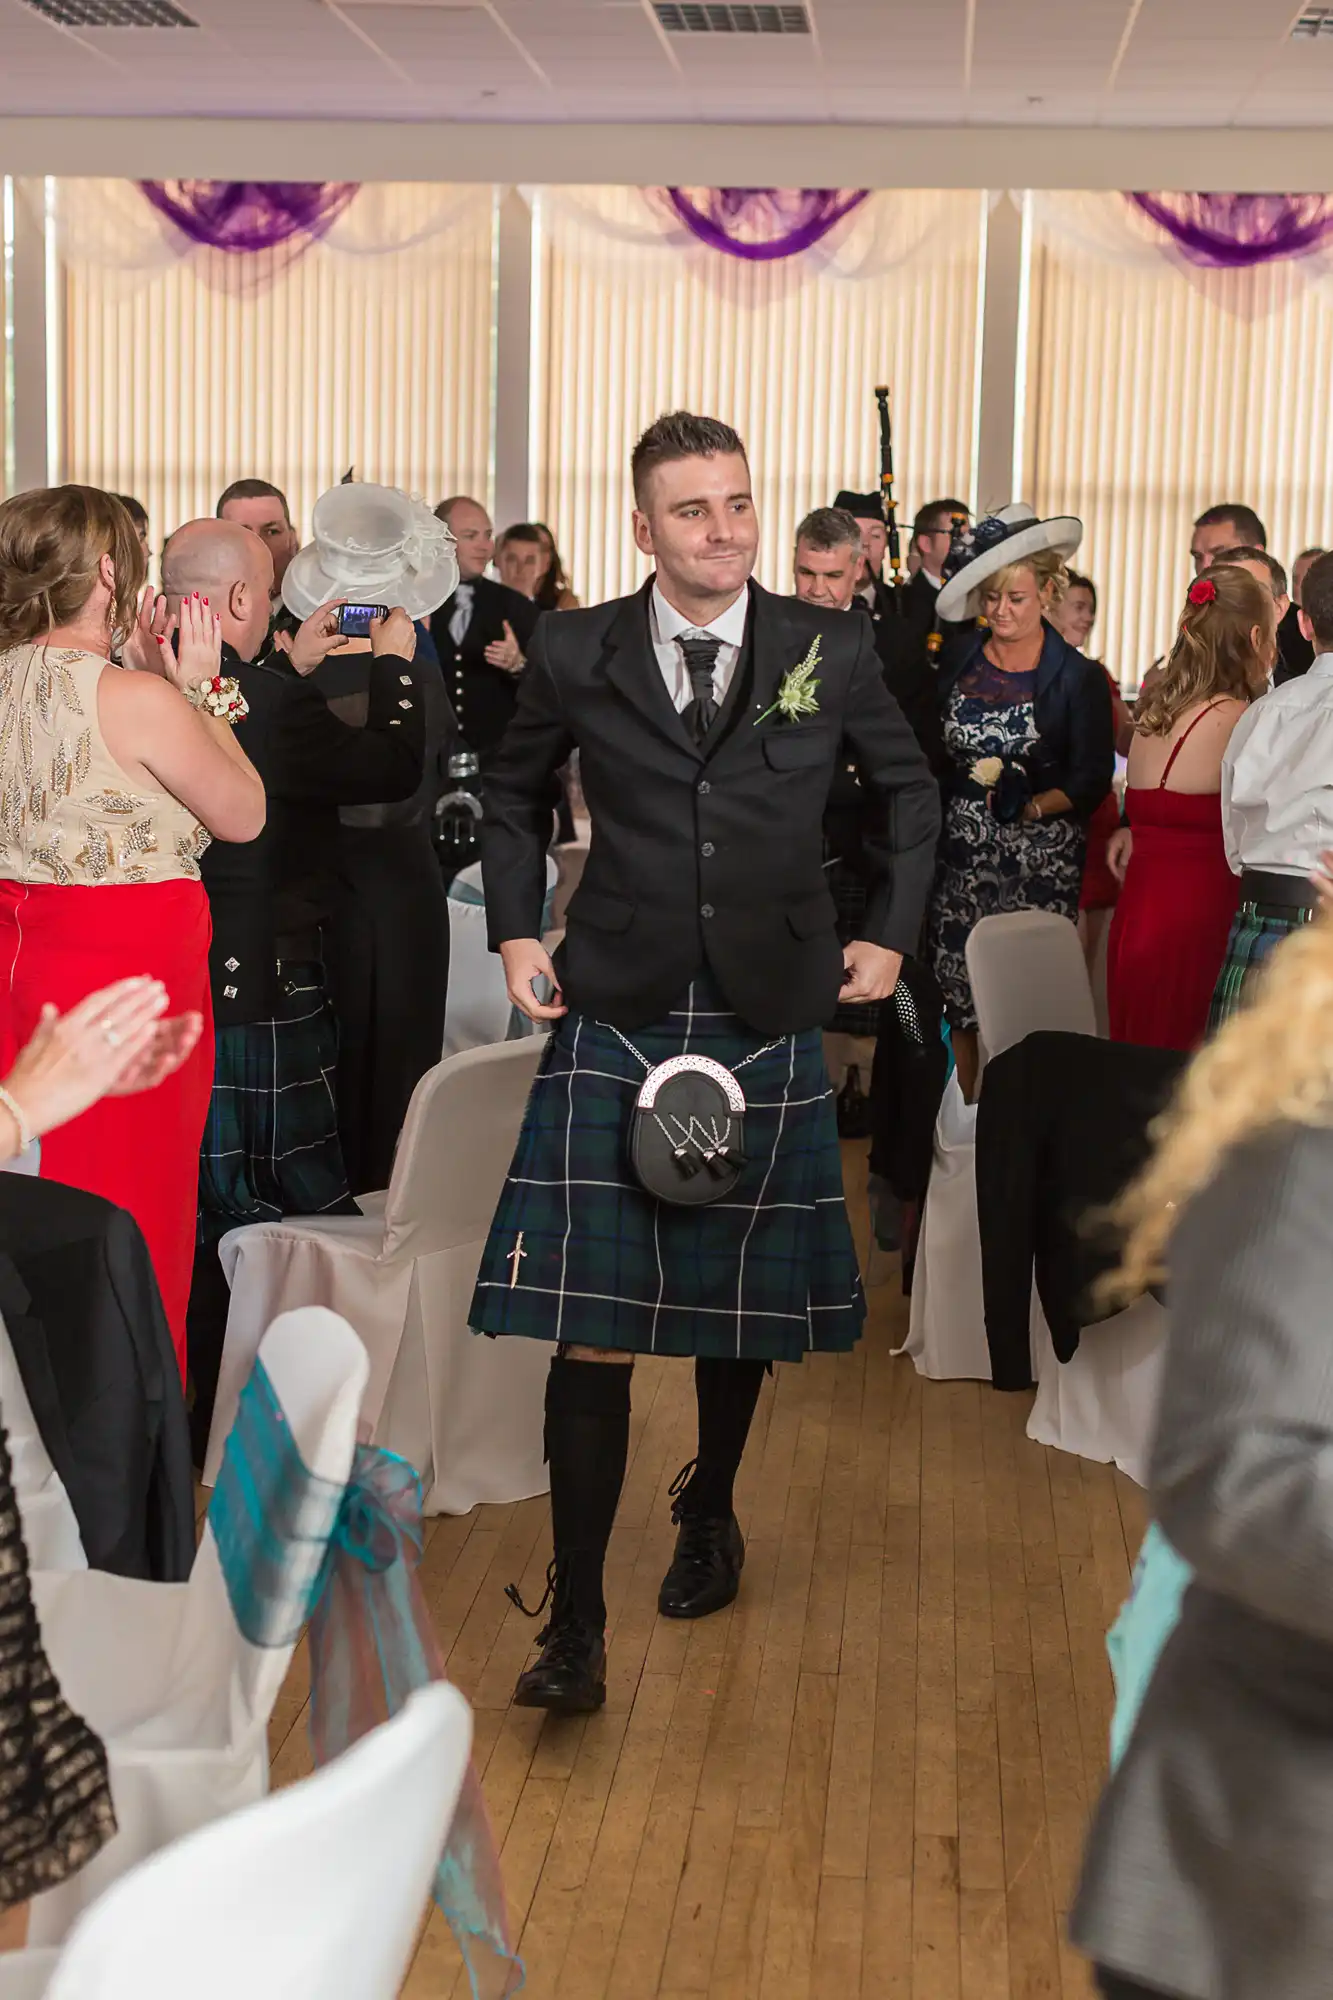 A man in a kilt and jacket smiling as he walks through a clapping crowd at a lively indoor event.